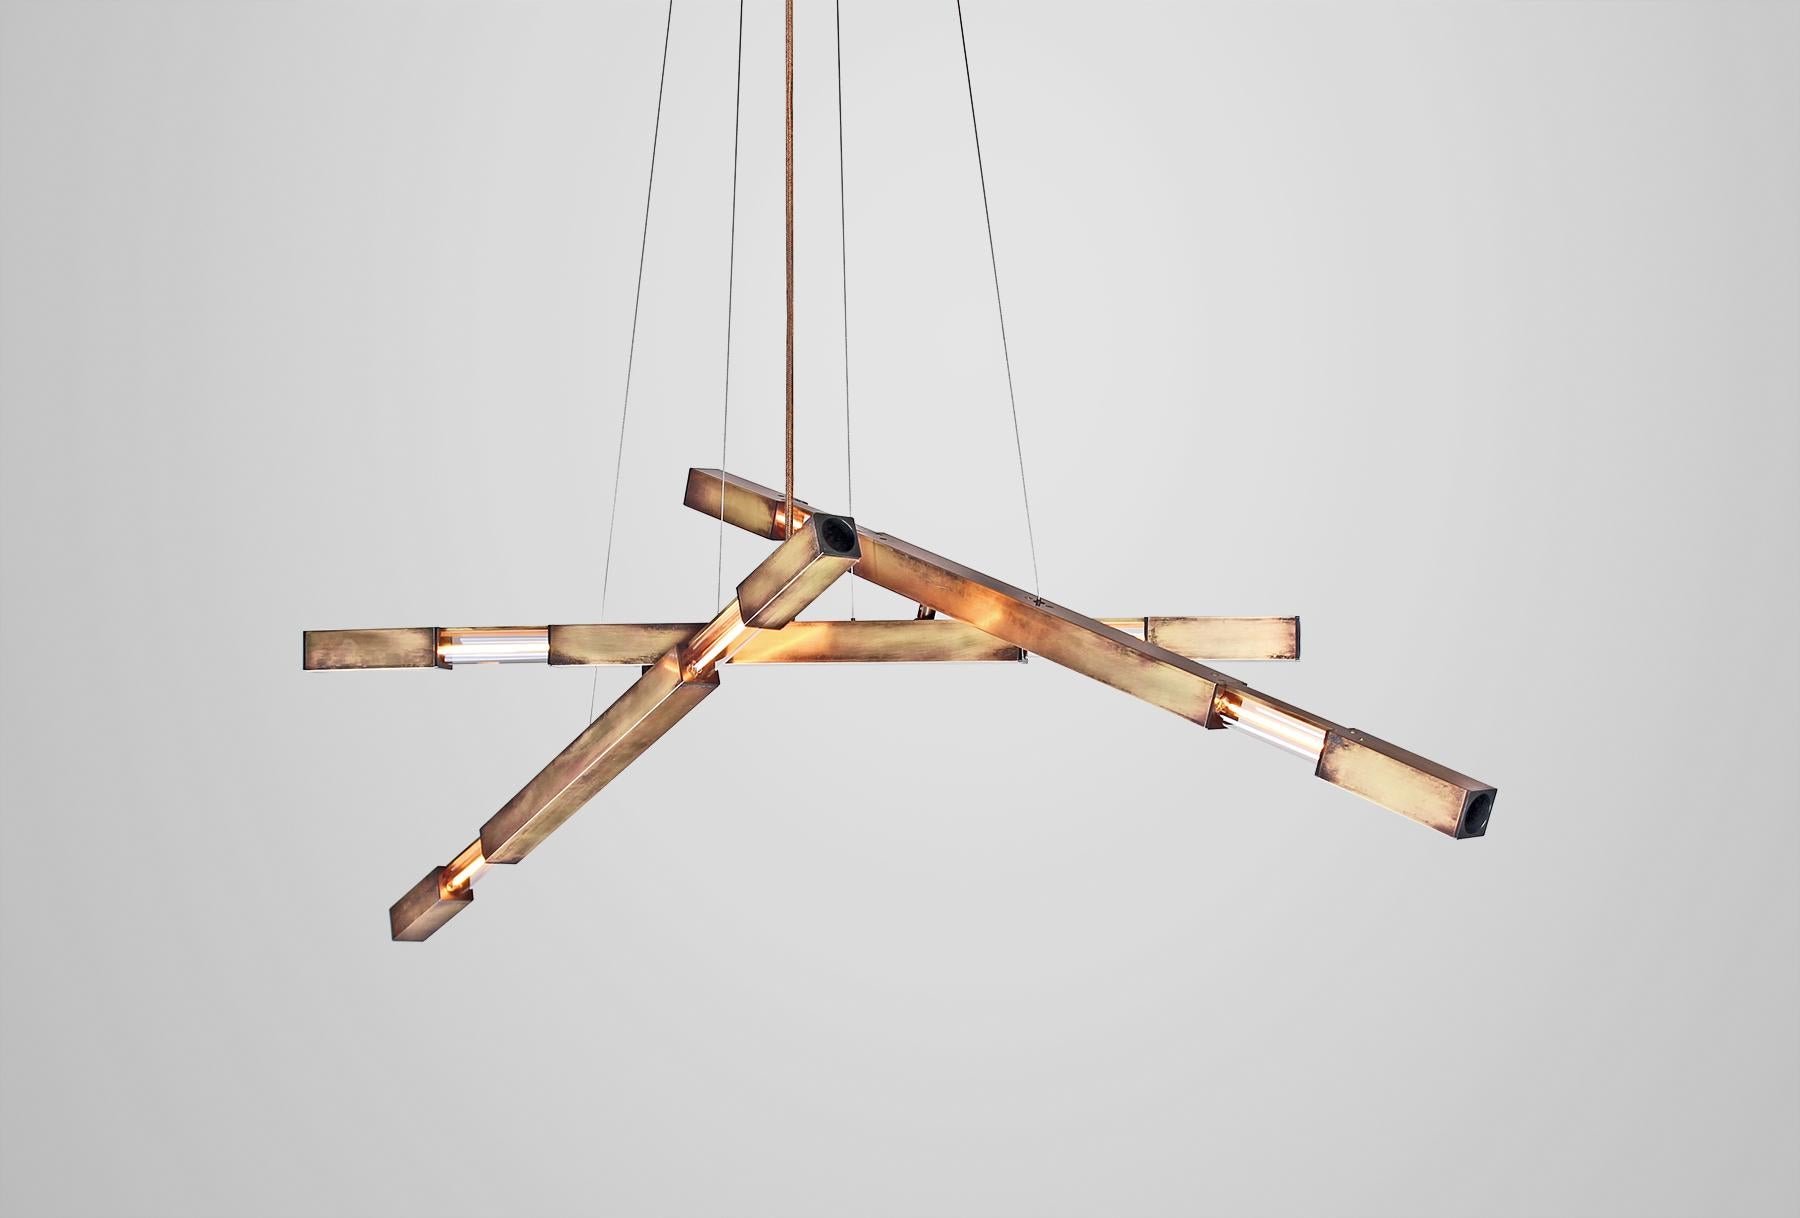 Dynamic Stilk Chandelier   Daikon

The Daikon Stilk Chandelier features a trio of illuminated branches. Each branch is connected using our custom dynamic swivel mount. The swivel feature allows for both horizontal and vertical movement and the